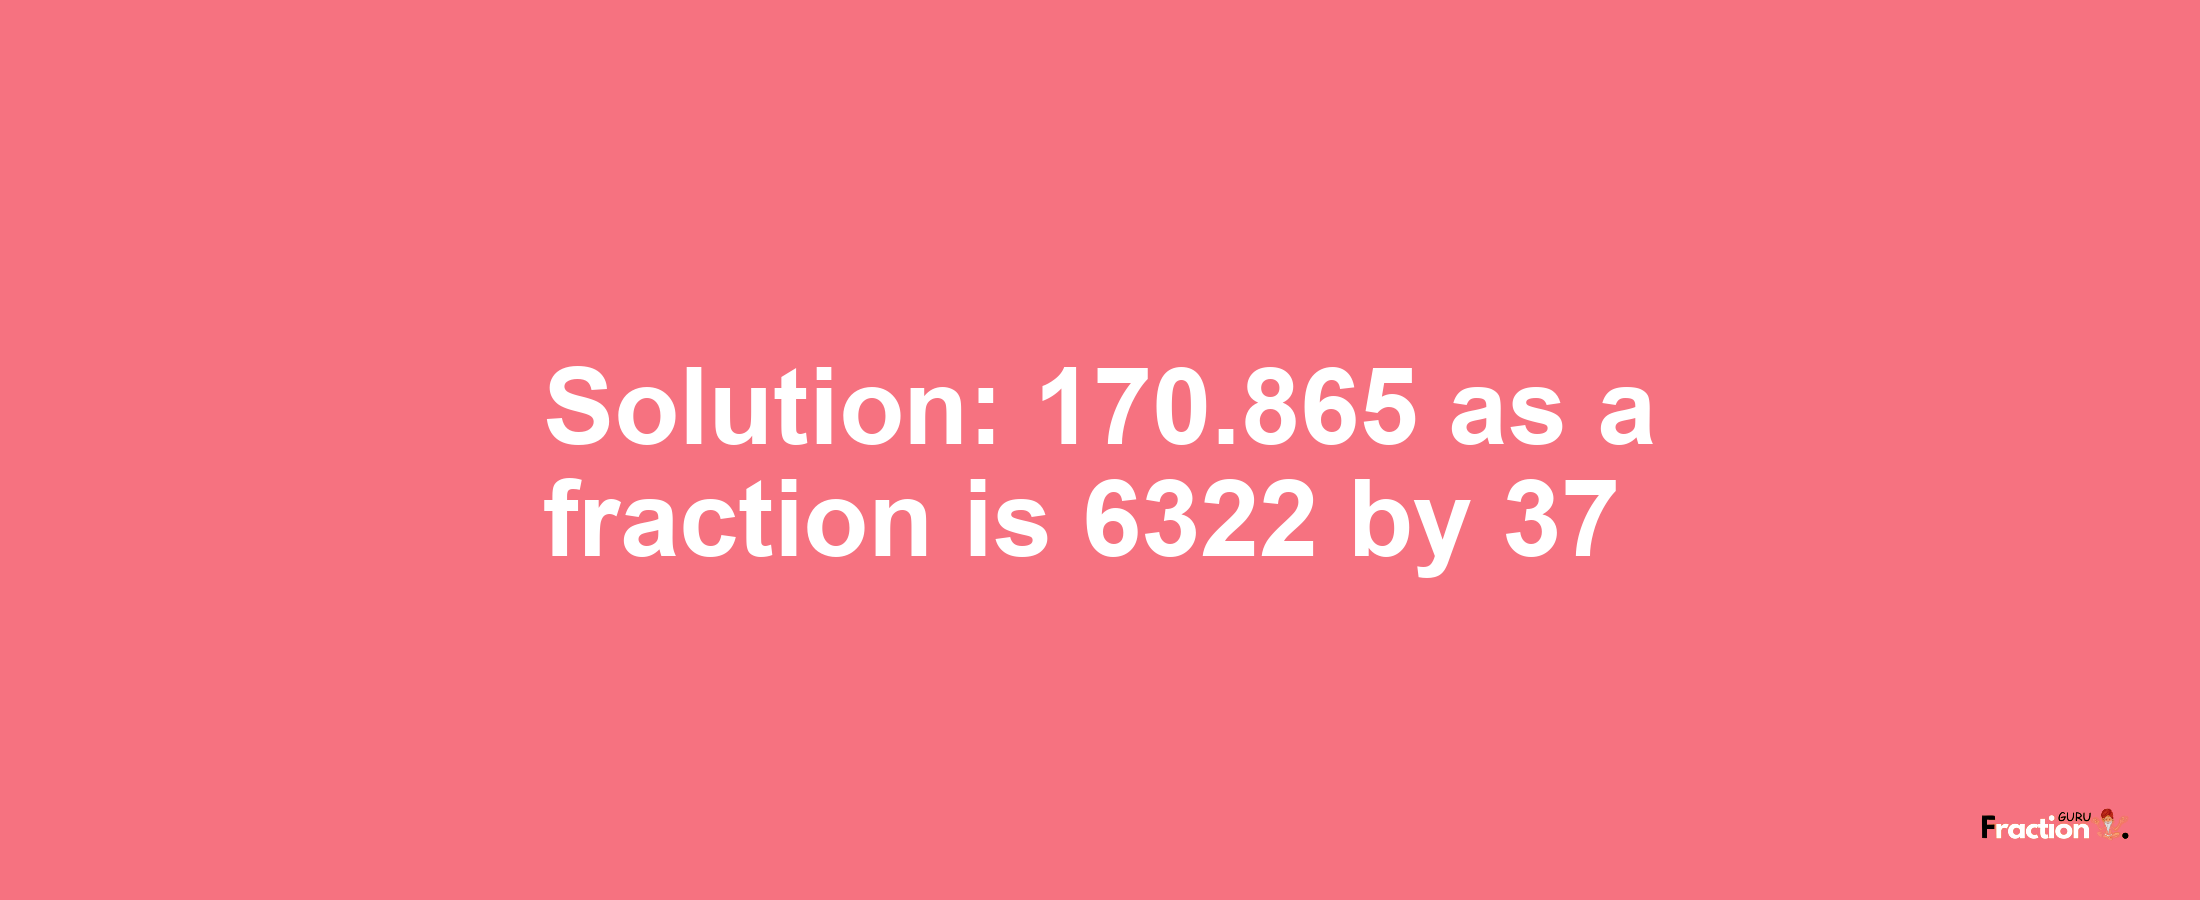 Solution:170.865 as a fraction is 6322/37